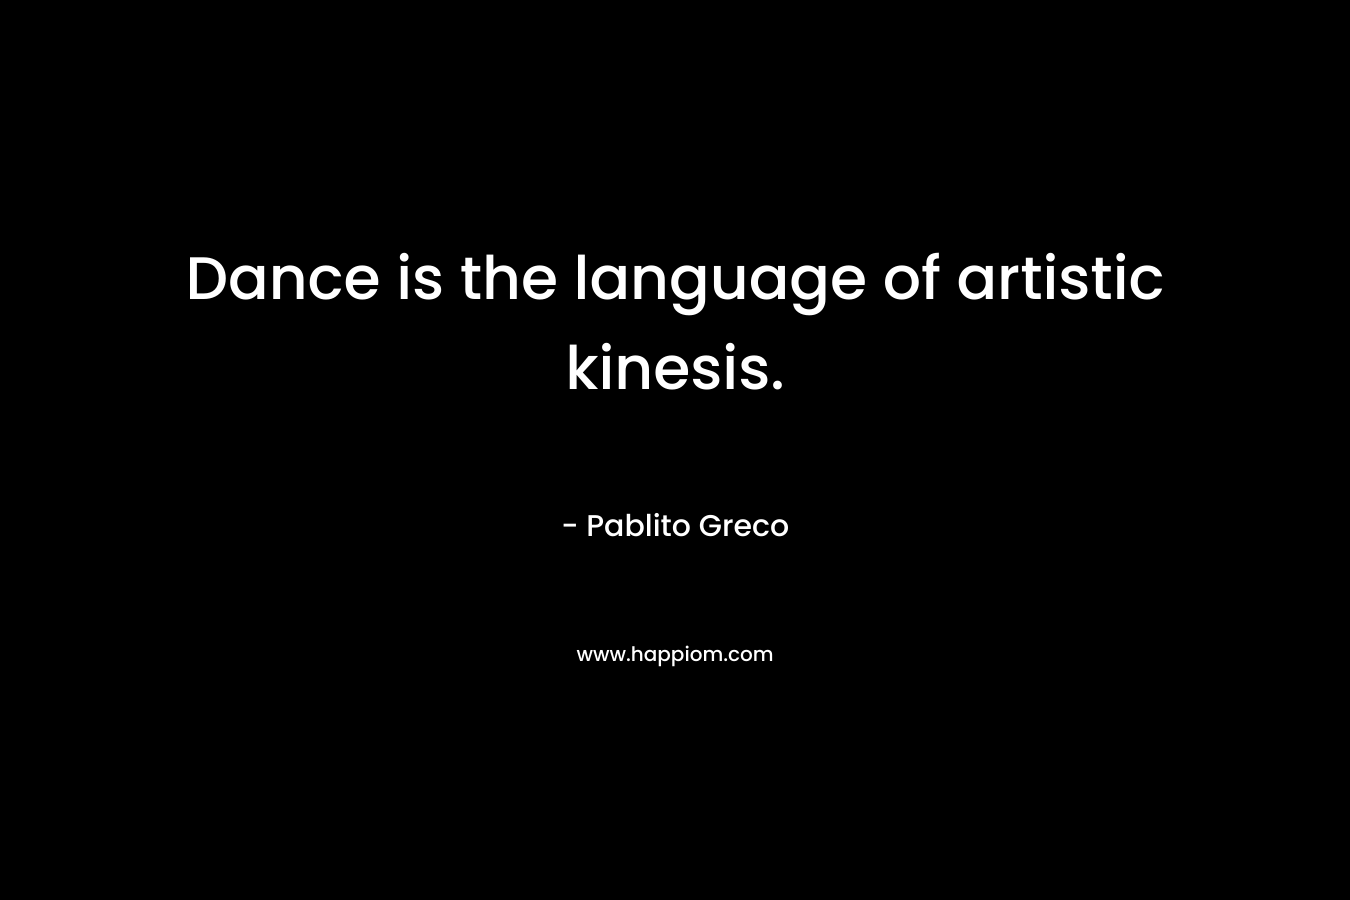 Dance is the language of artistic kinesis.